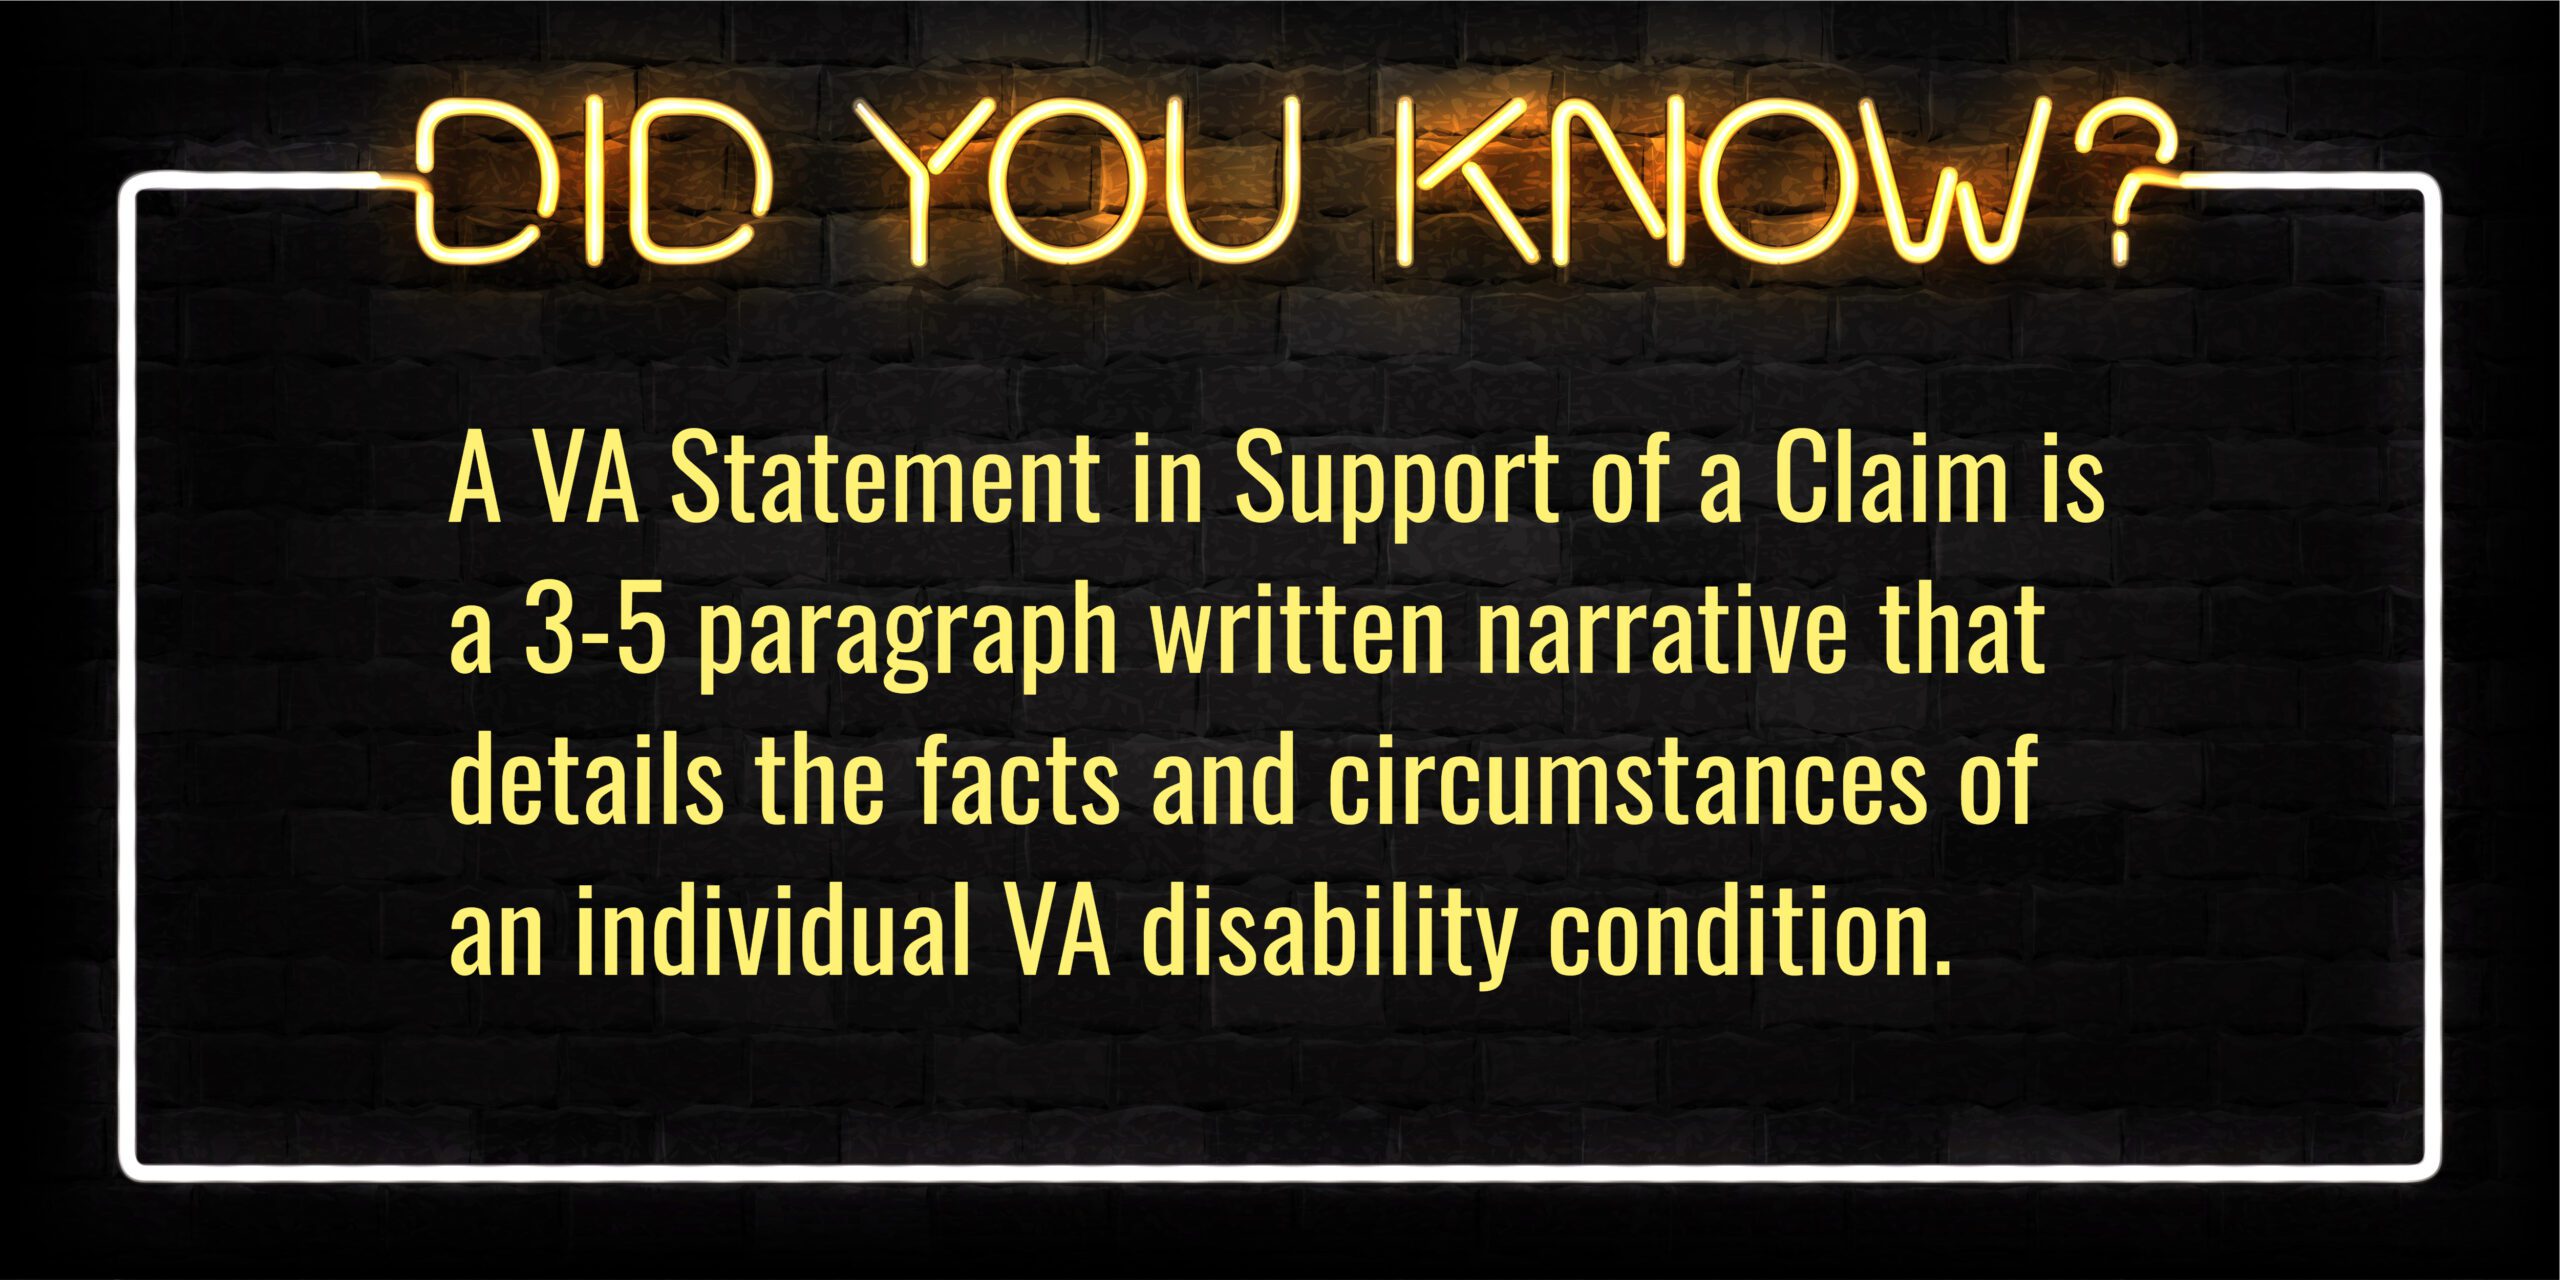 What is a VA Statement in Support of a Claim